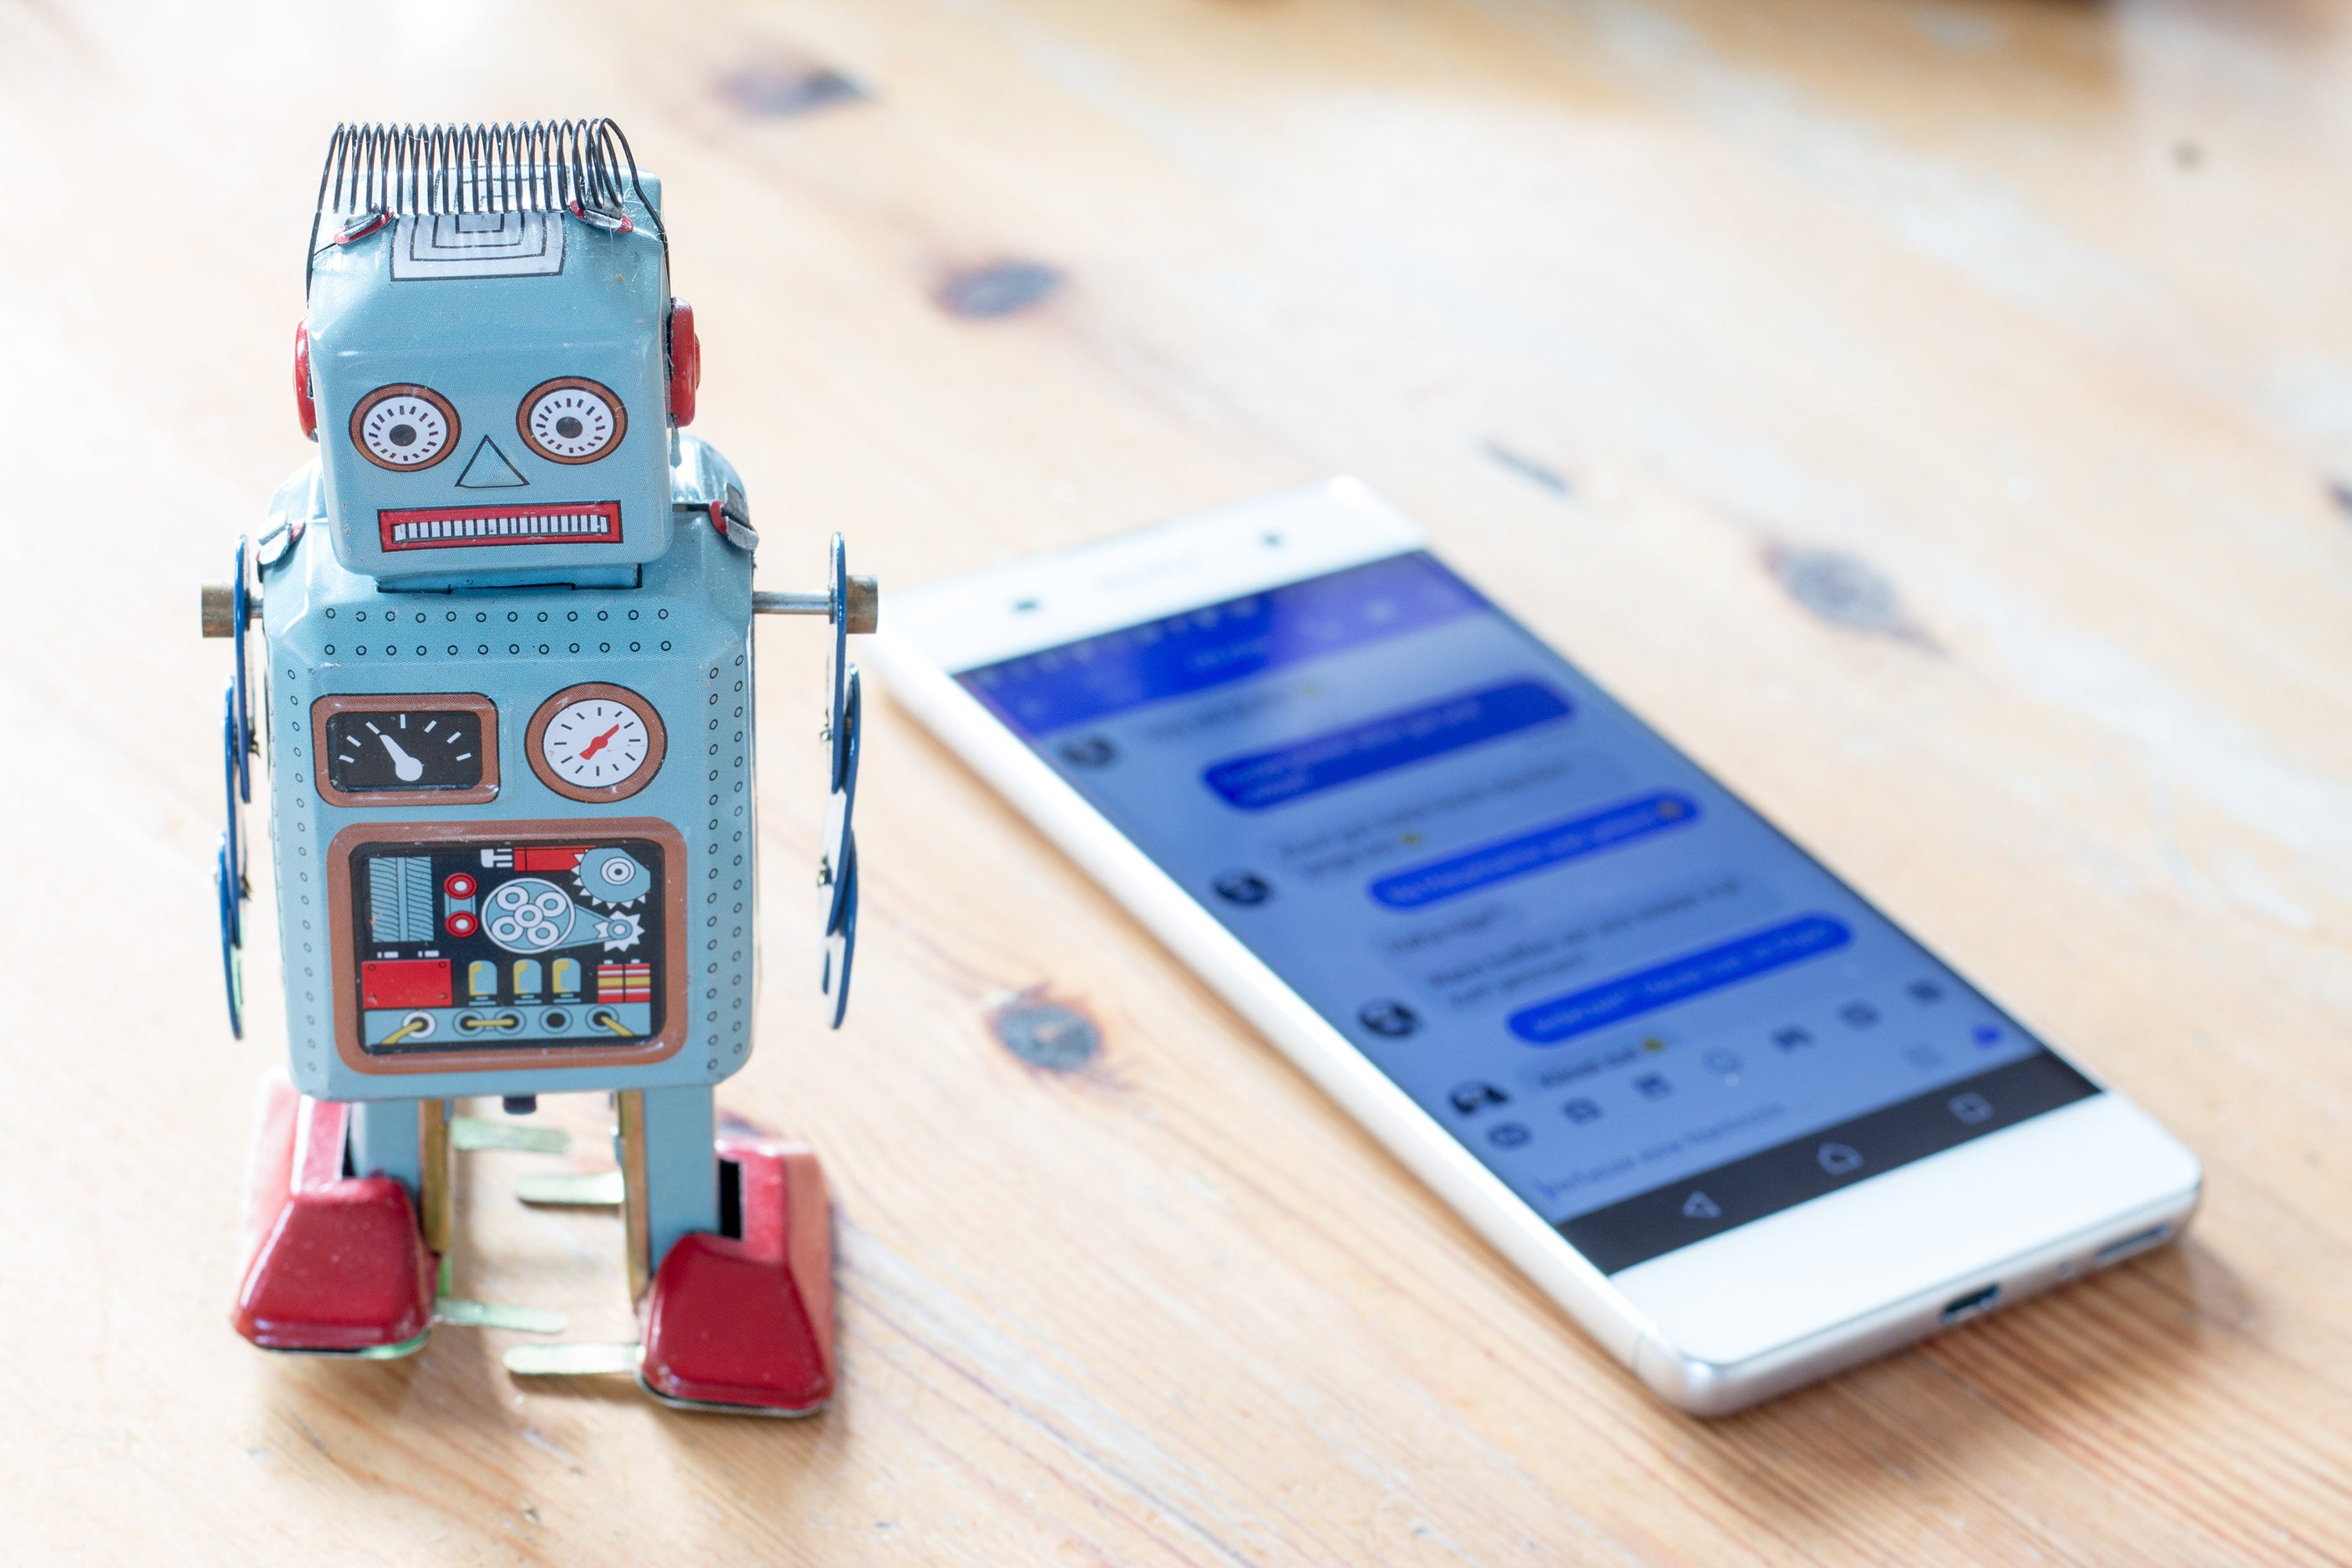 Online chatbots are becoming increasingly sophisticated, capable of performing daily office tasks like writing emails. Photo: TNS